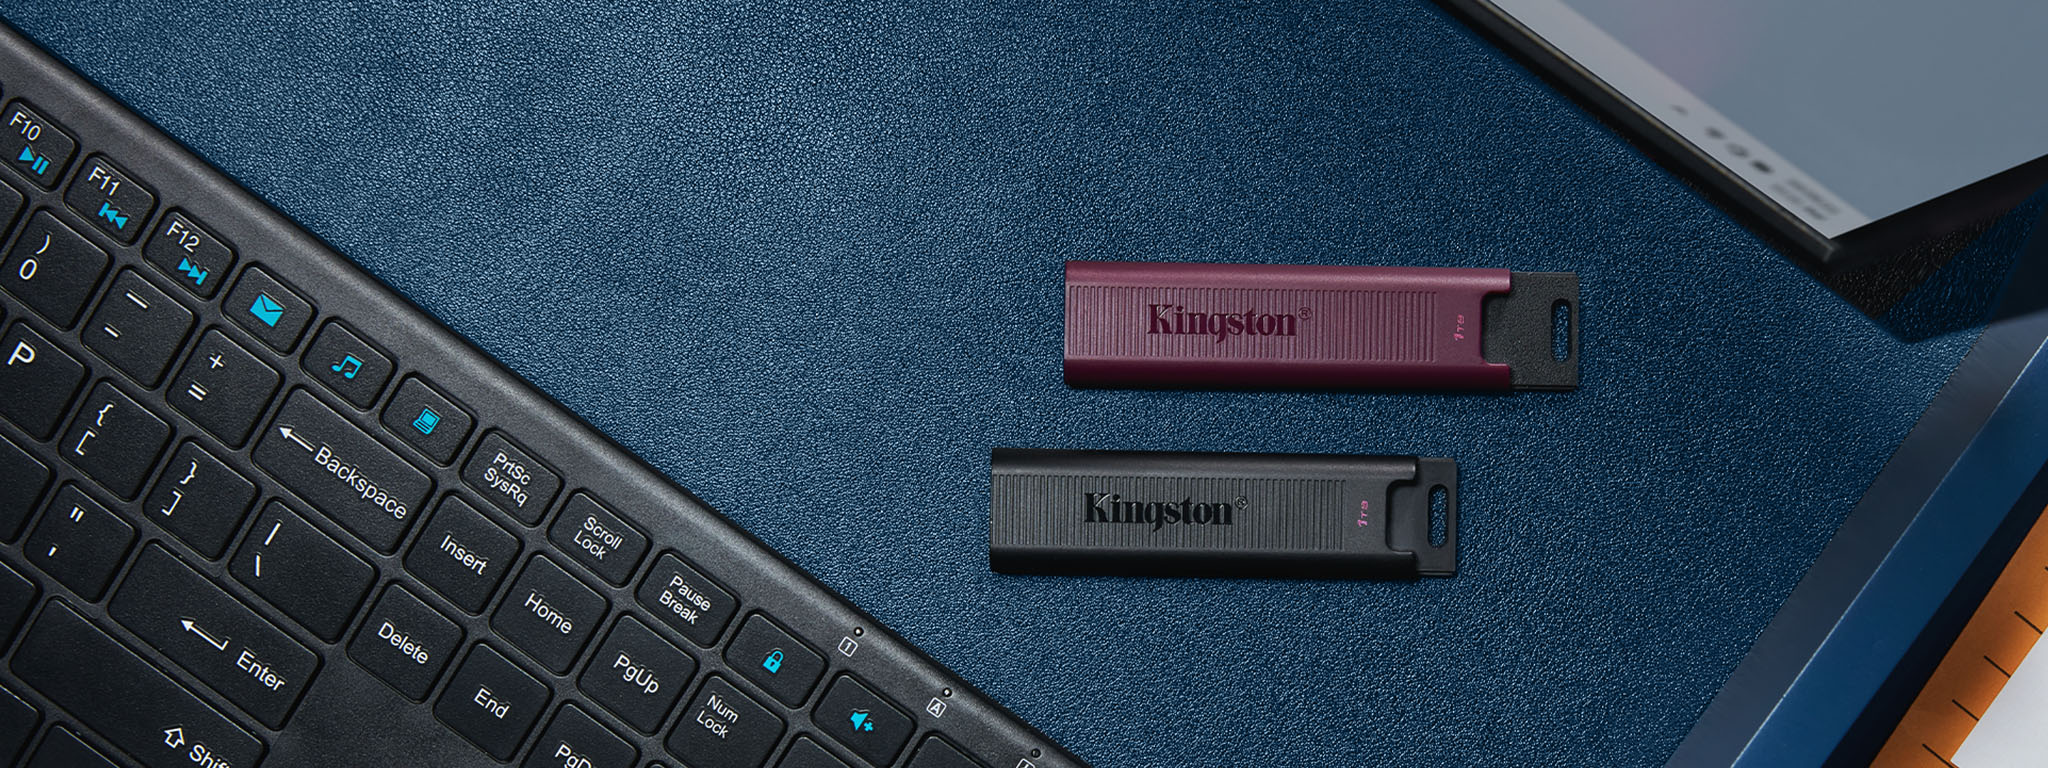 Overhead view of DT Max flash drives, USB-C in black and USB-A in burgundy, sitting between a keyboard and monitor